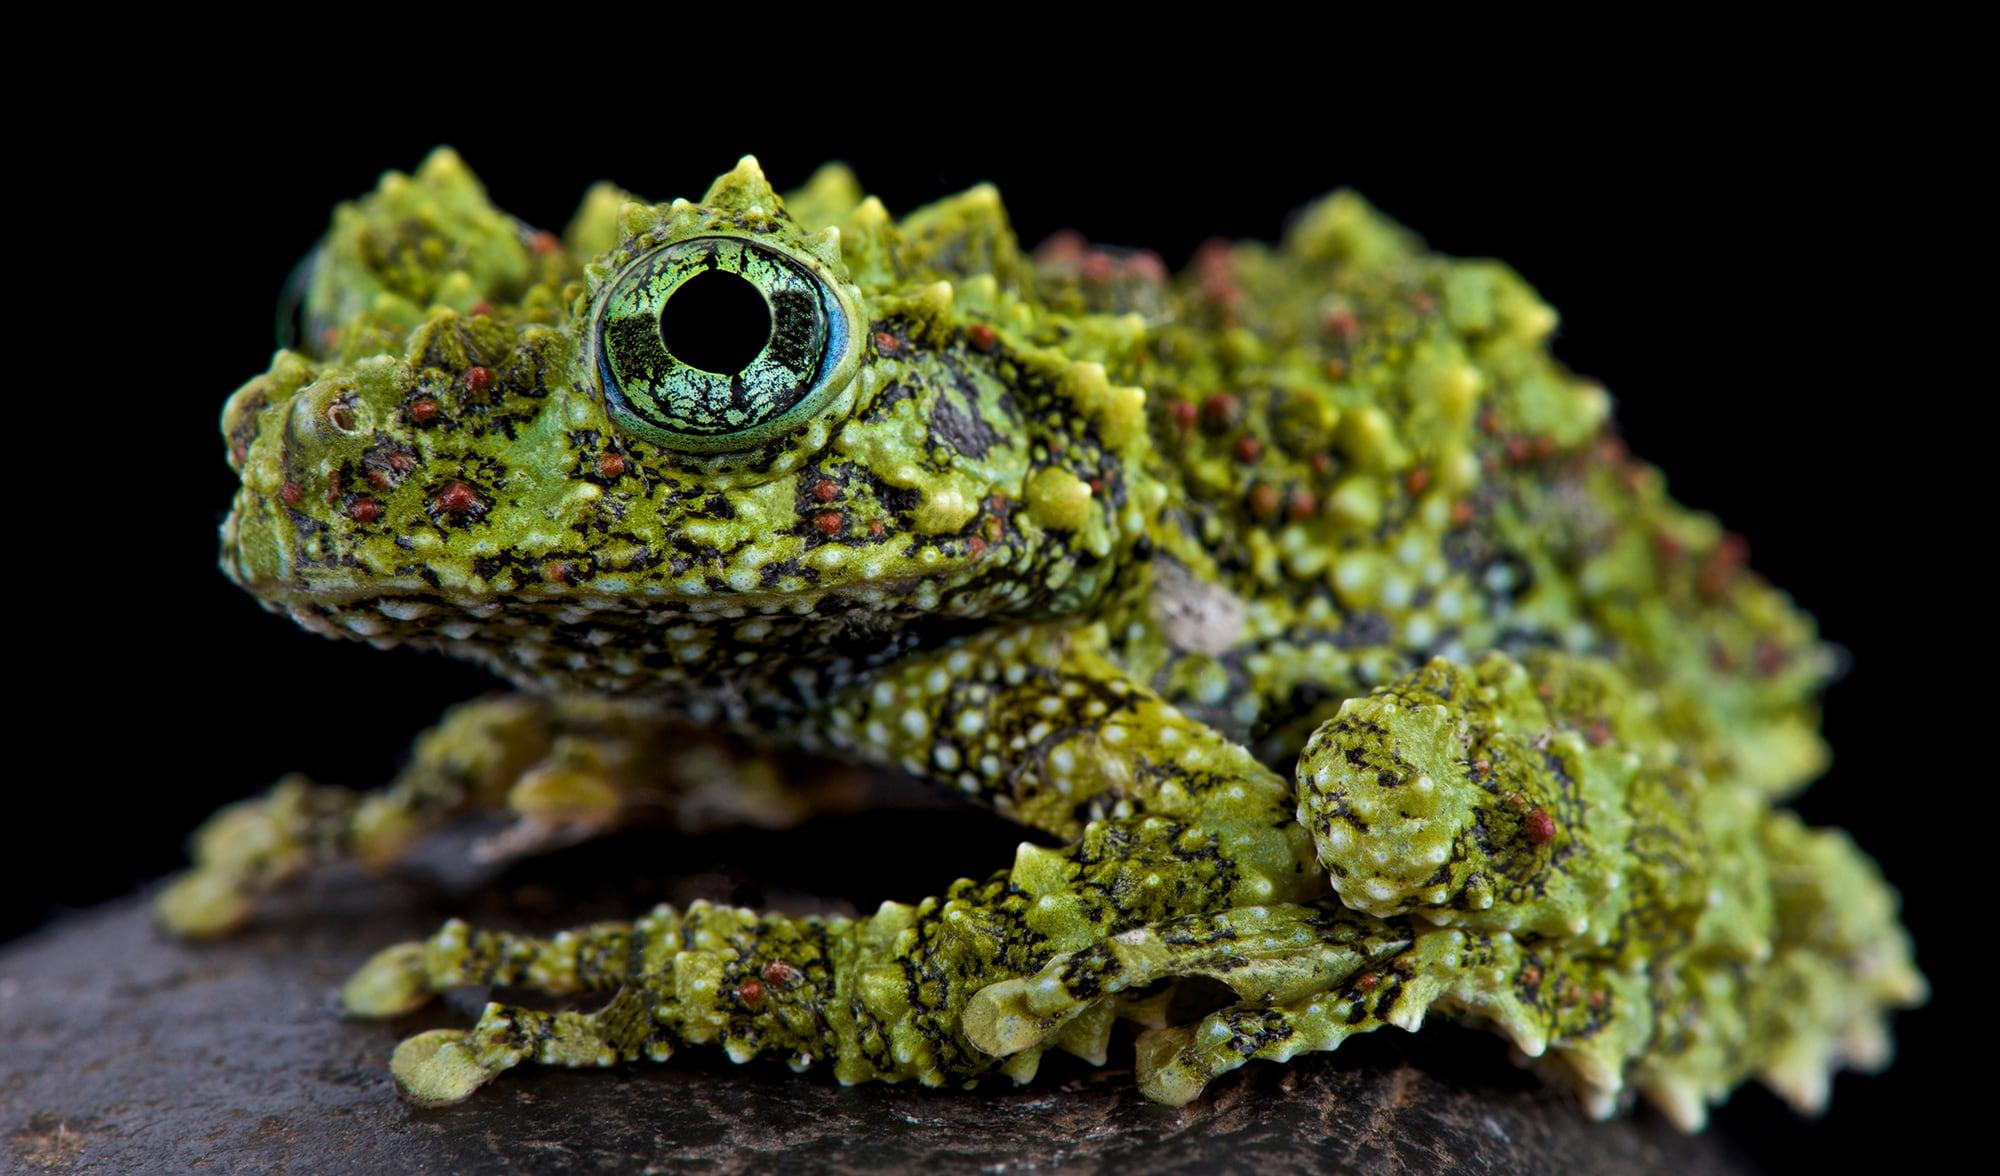 The mossy frog is the sweetest thing - Australian Geographic